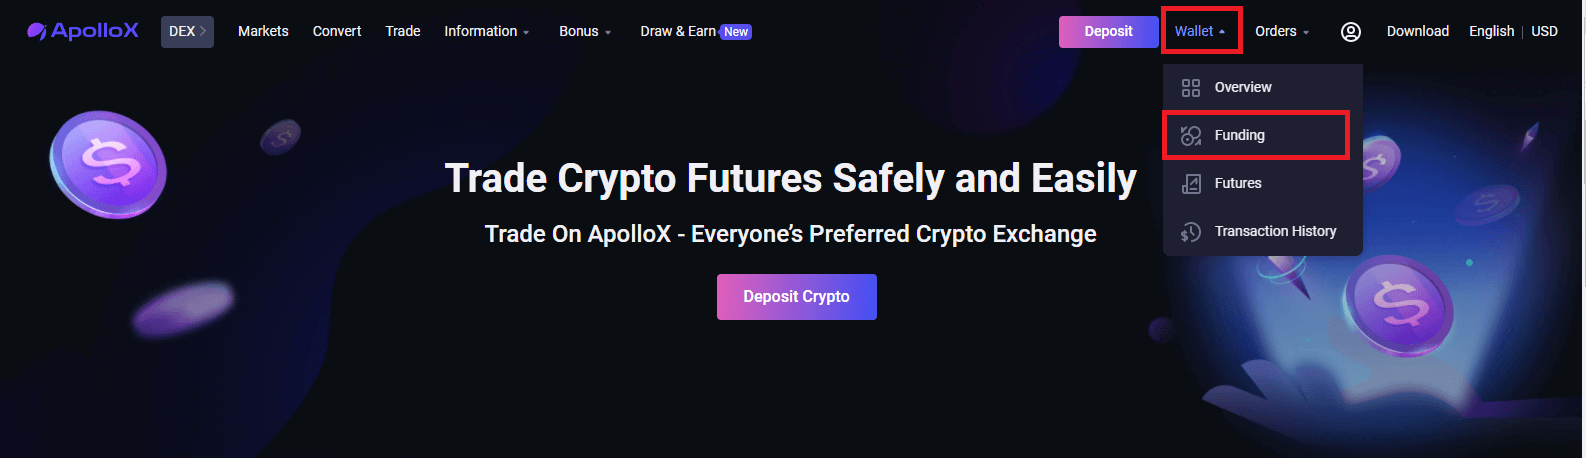 How to Withdraw from ApolloX